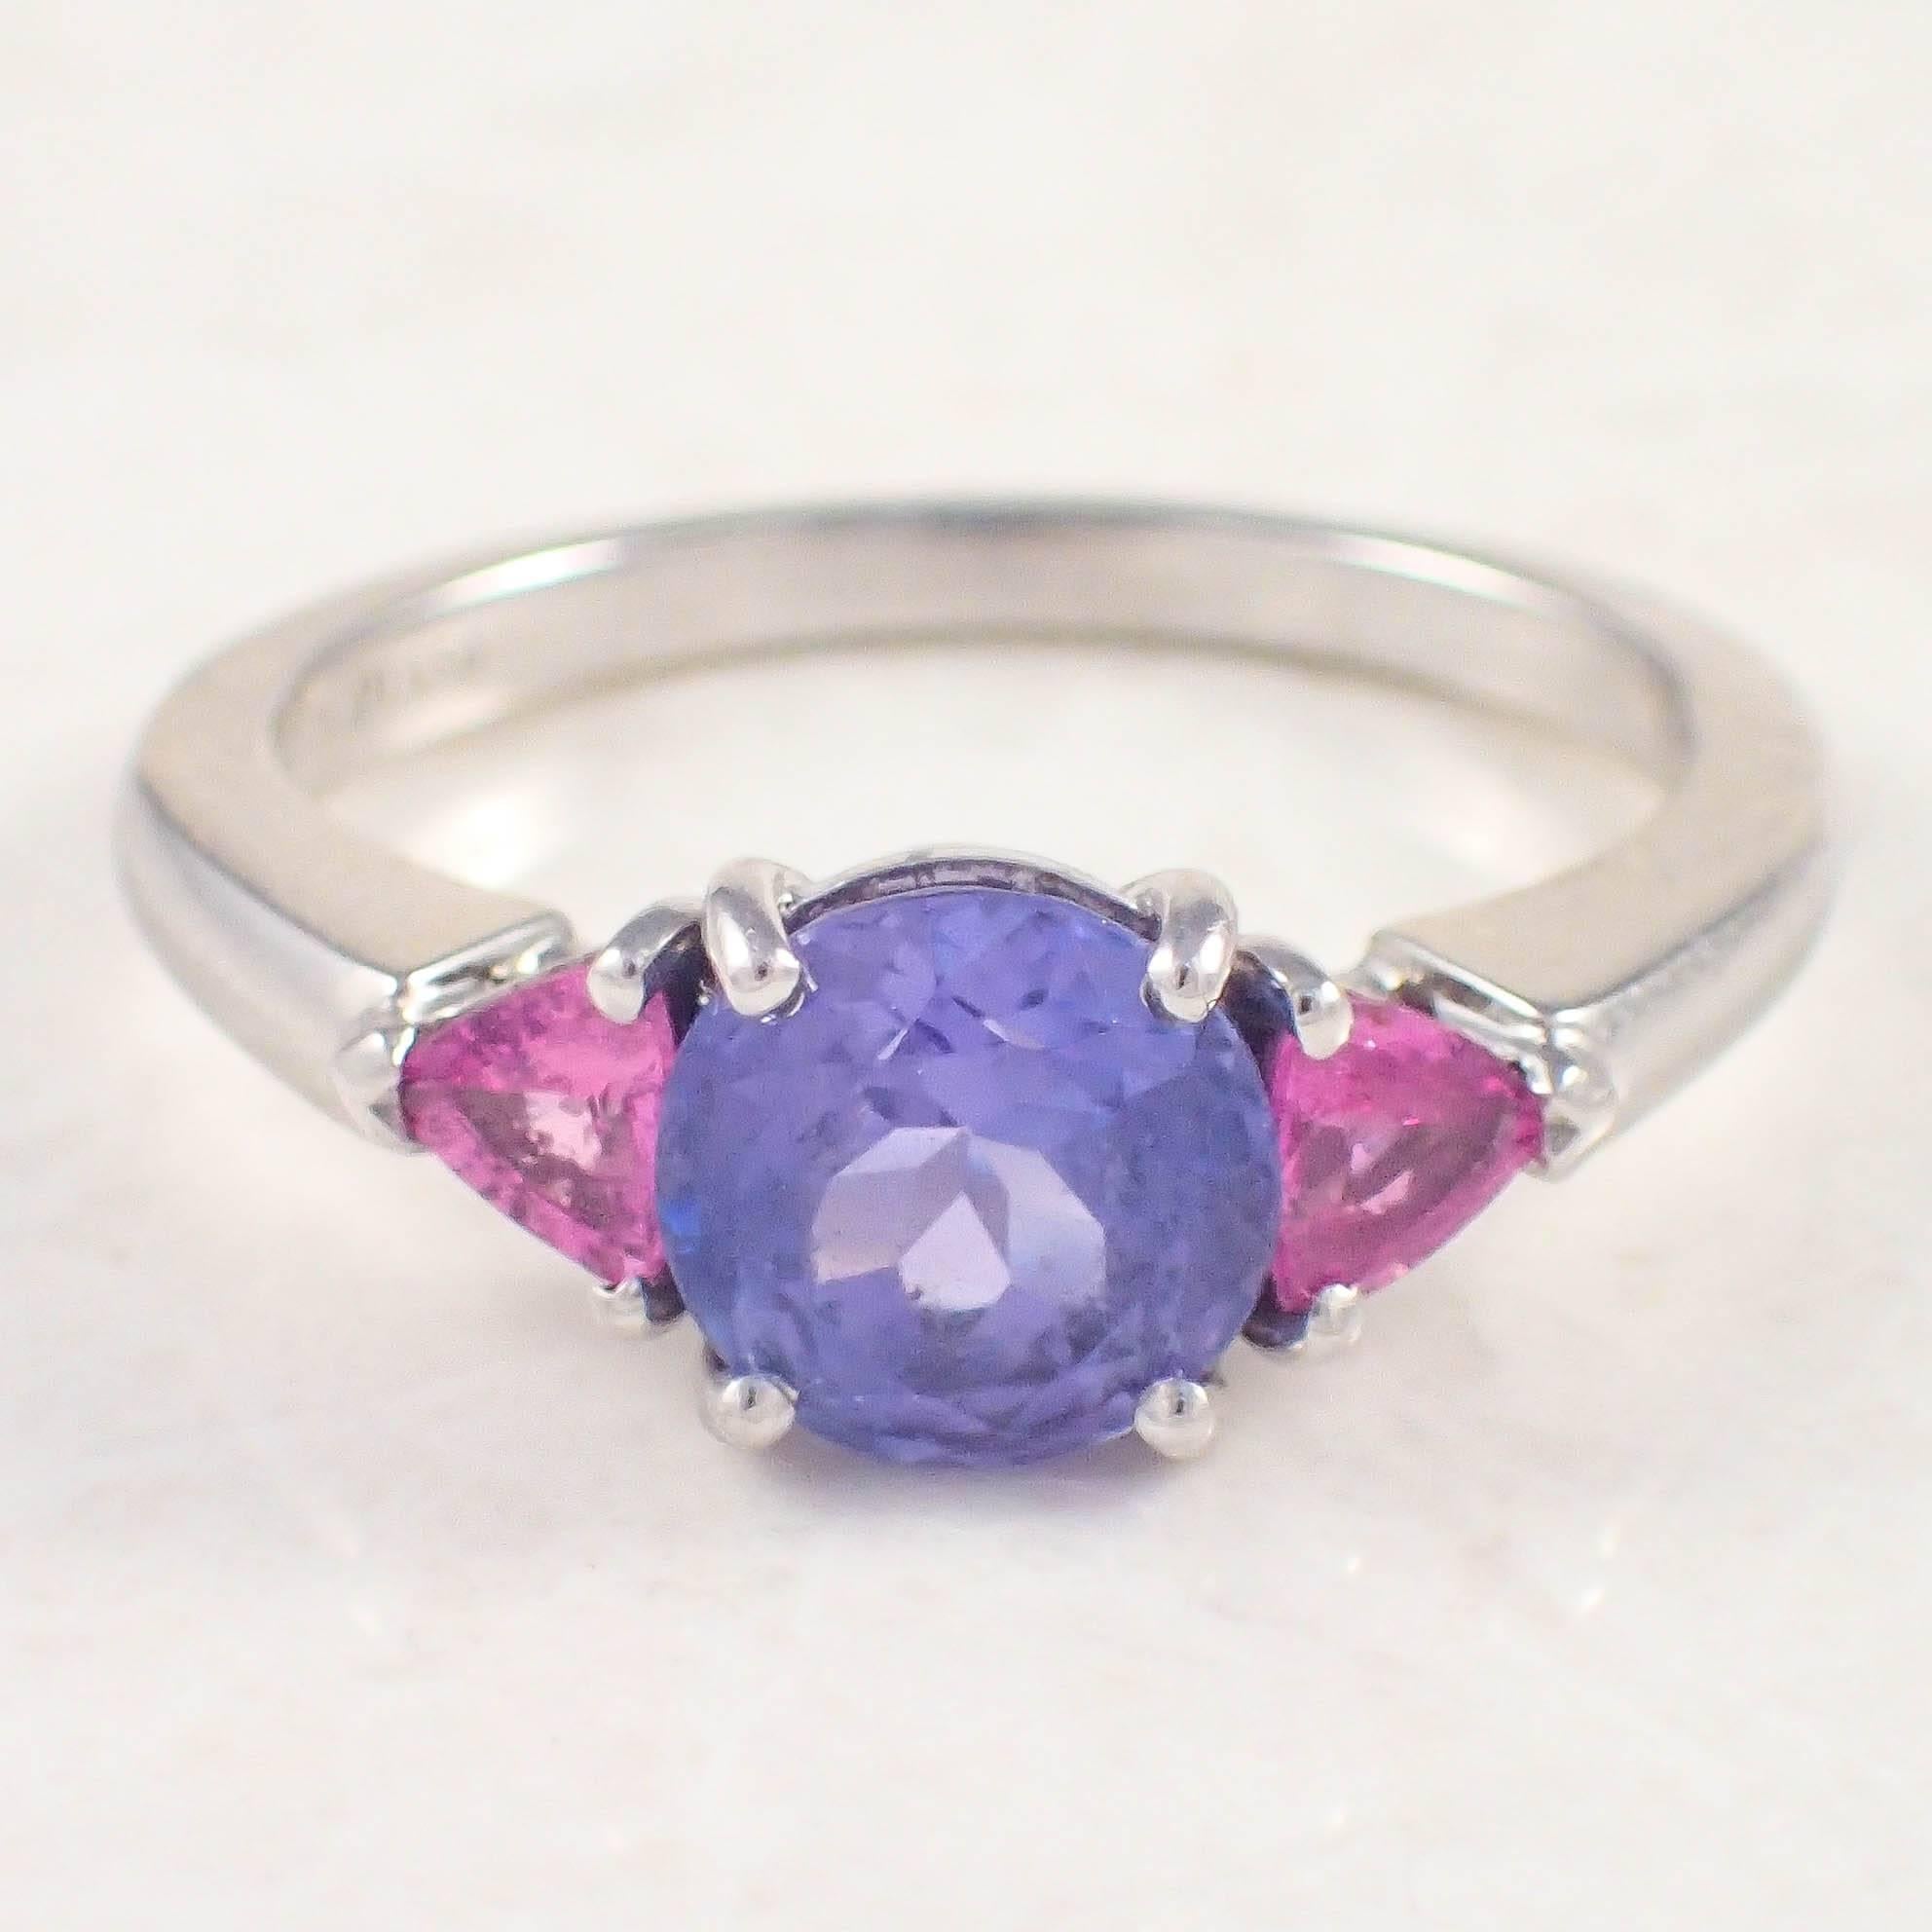 Platinum tanzanite and sapphire Tiffany & Co. ring. The three stone style ring is centered with an approximately 1.50 carat round tanzanite, accented by 2 trilliant cut, 3.5 mm pink sapphires weighing approximately .50 carat total. Stamped 